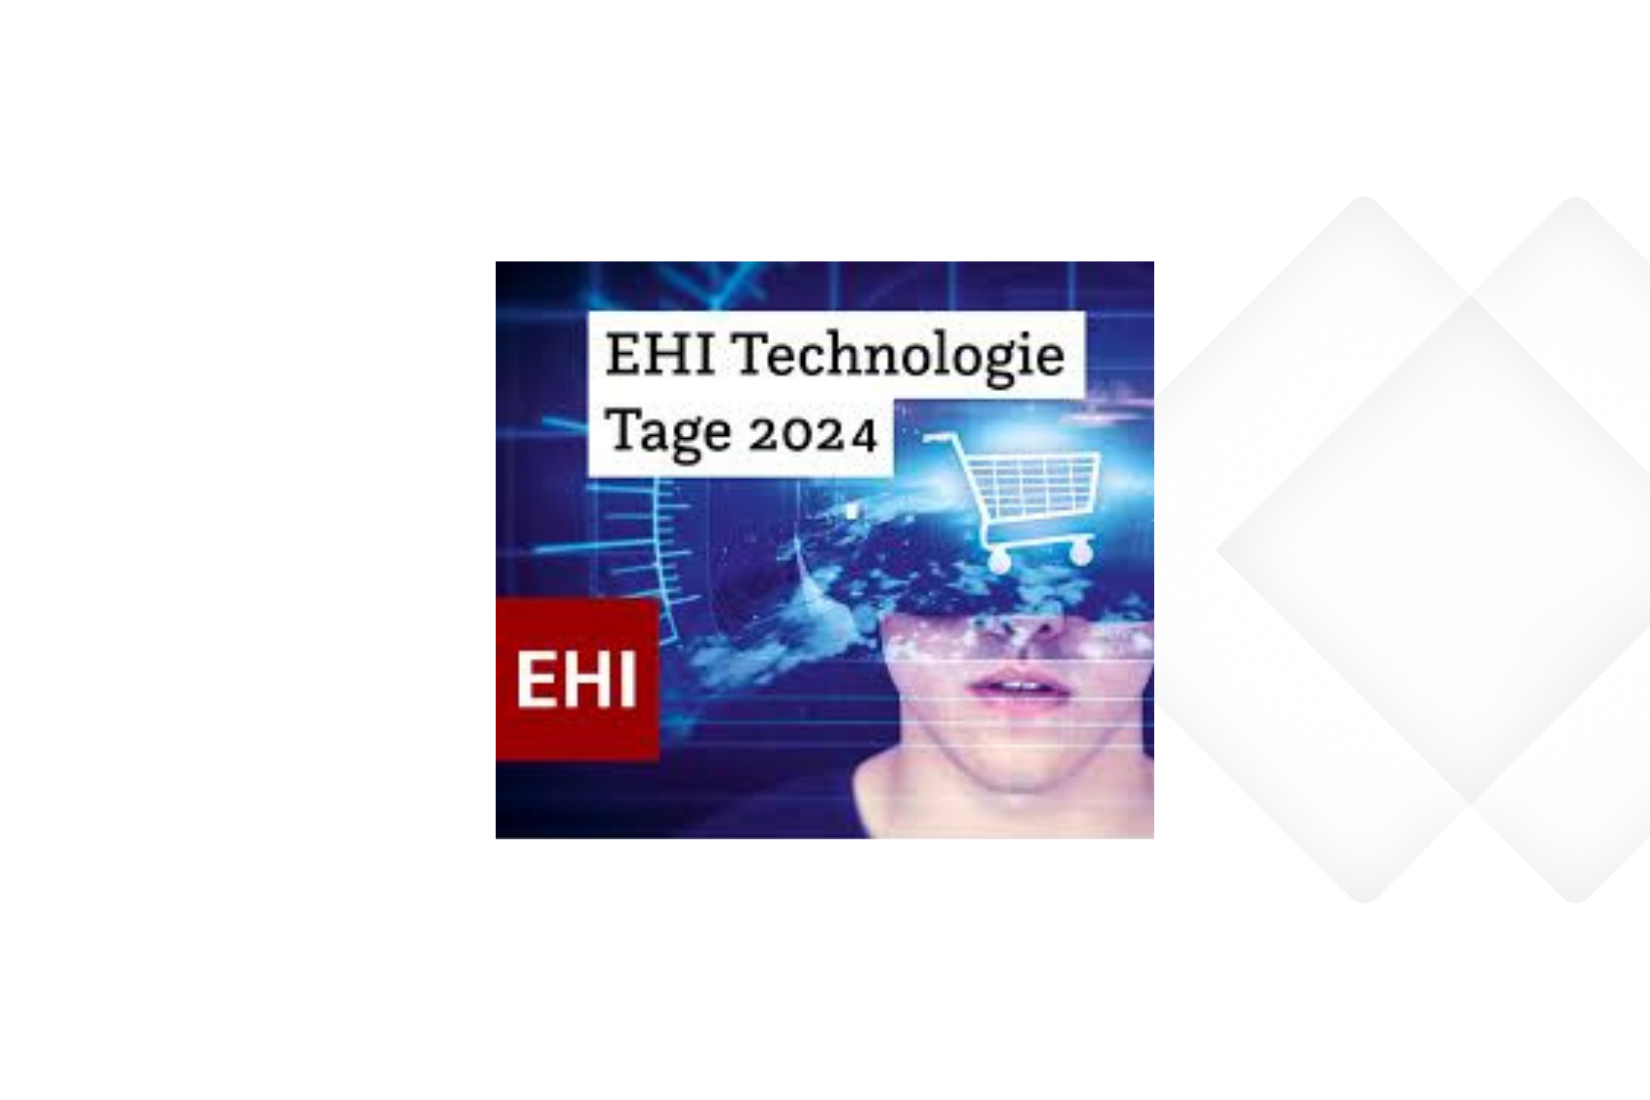 Join VusionGroup at EHI Technologie Tage 2024